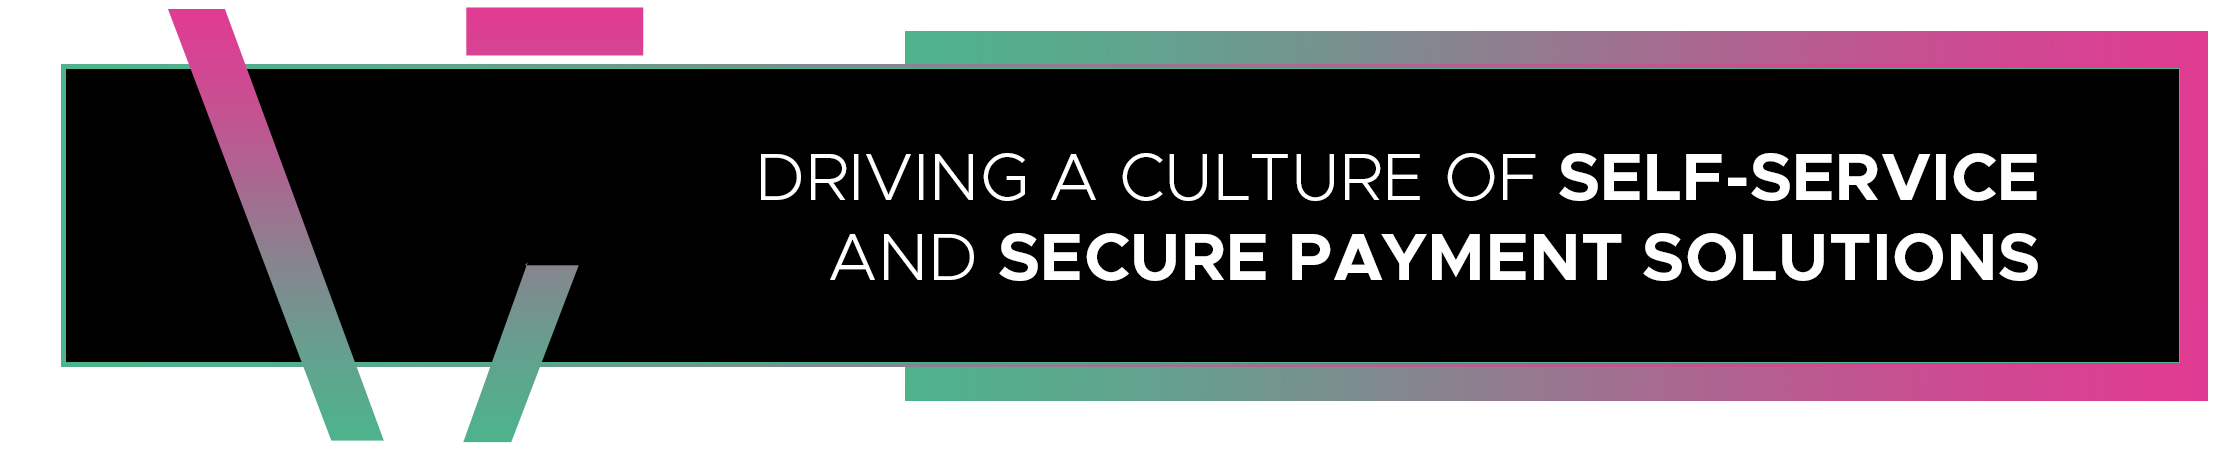 DRIVING A CULTURE OF SELF-SERVICE AND SECURE PAYMENT SOLUTIONS